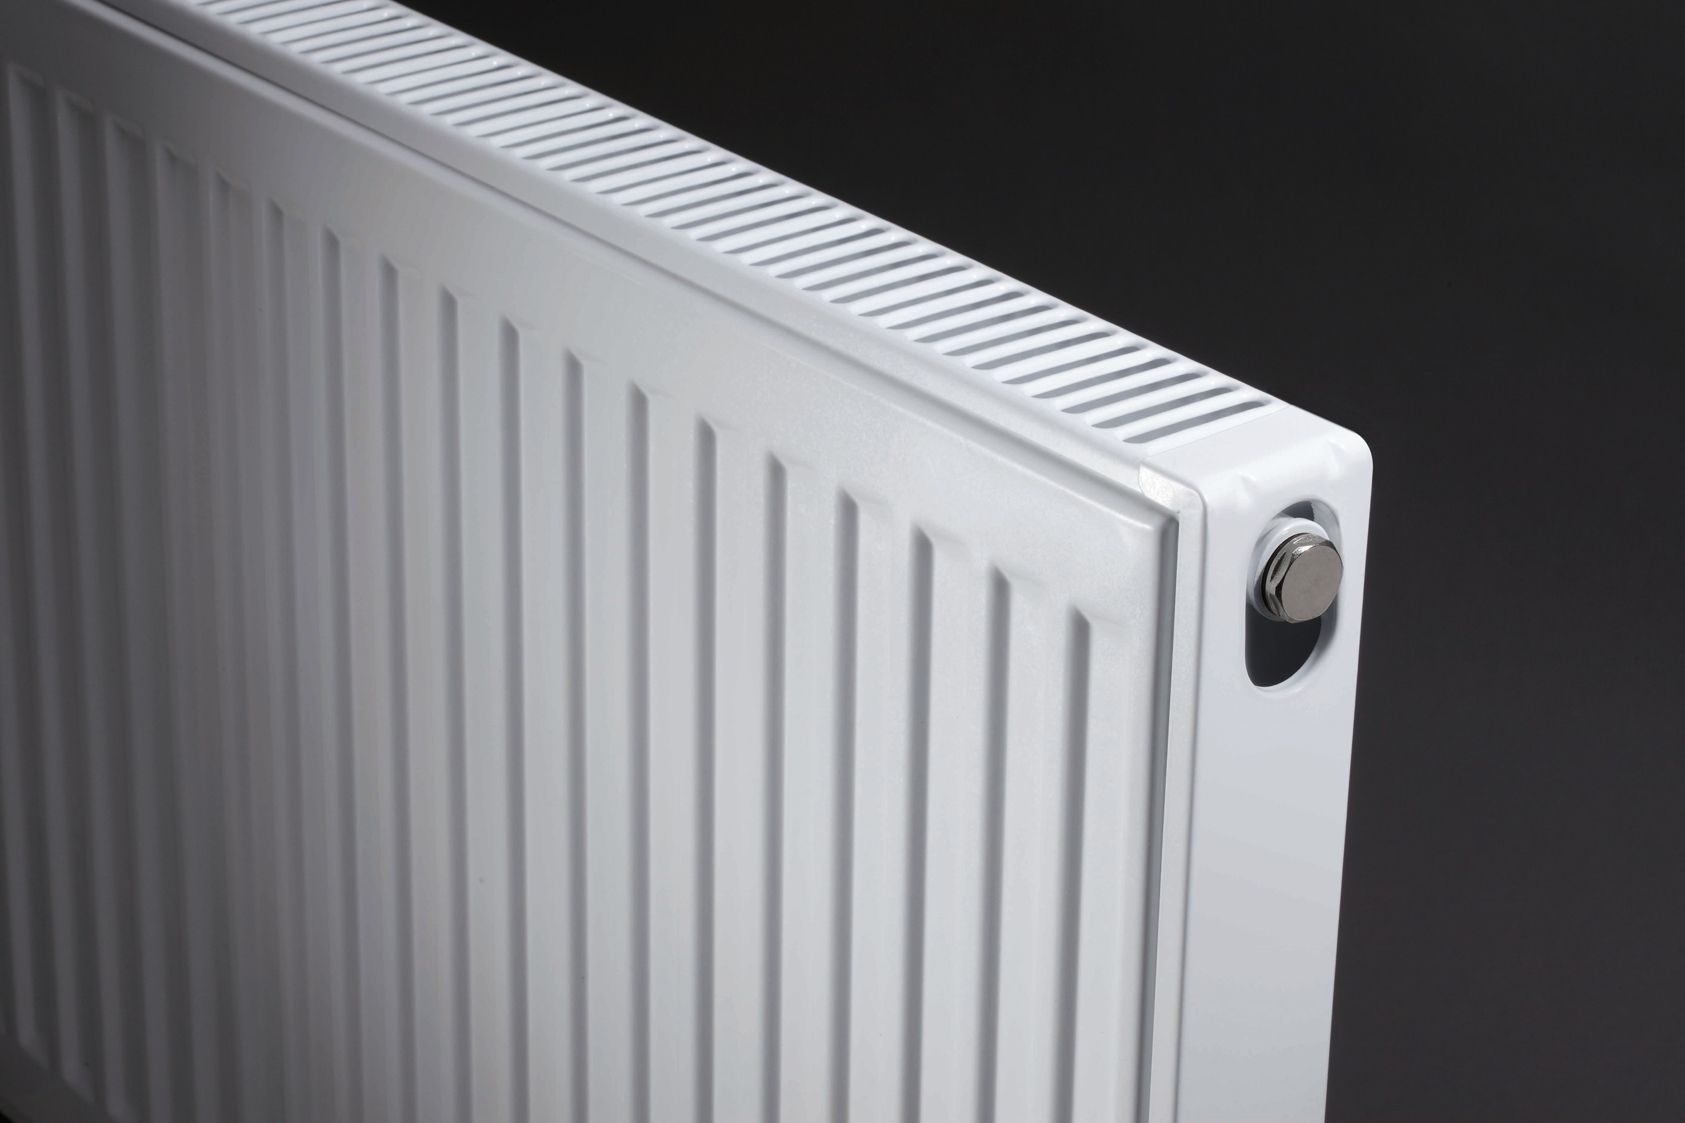 Lunch Moeras band Kompact Type 21 Double-Panel Single Convector Radiator 600mm x 1200mm |  JTPickfords.com